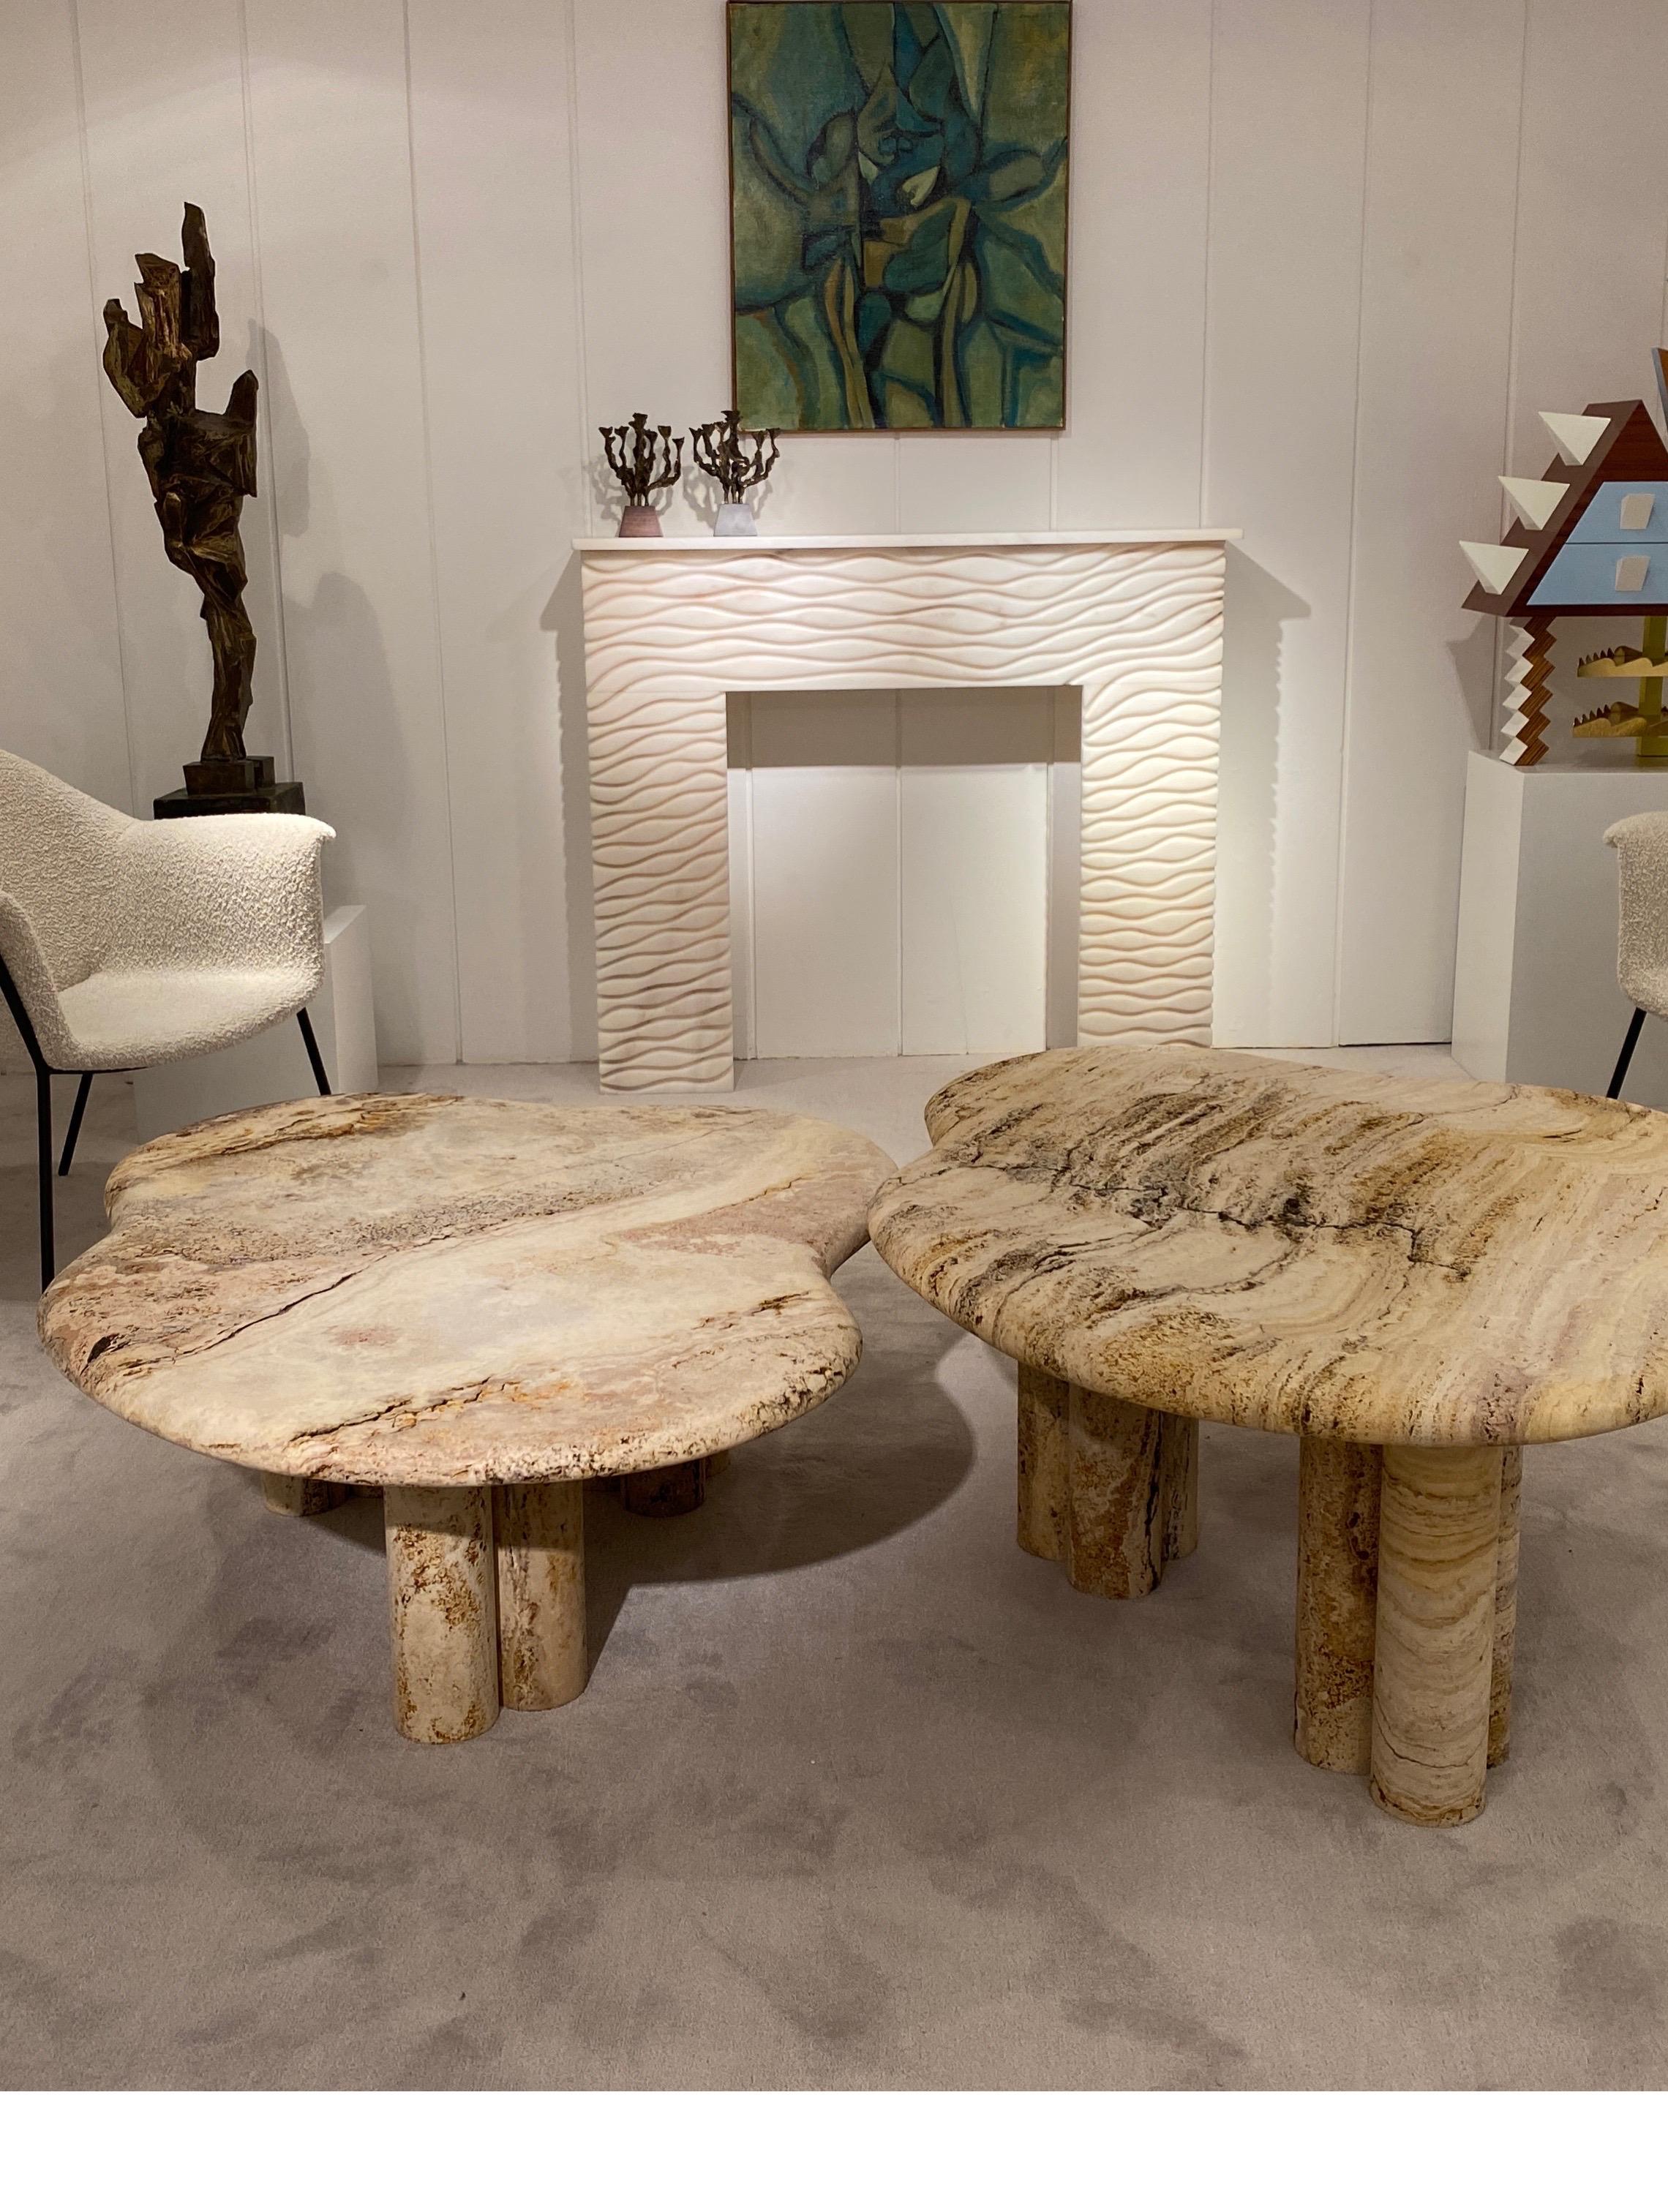 2 Coffe Tables in travertin marble  top and  feets
Signed on the feet By The  french artist Jean Frederic Bourdier
each table is diferent and hand woked
